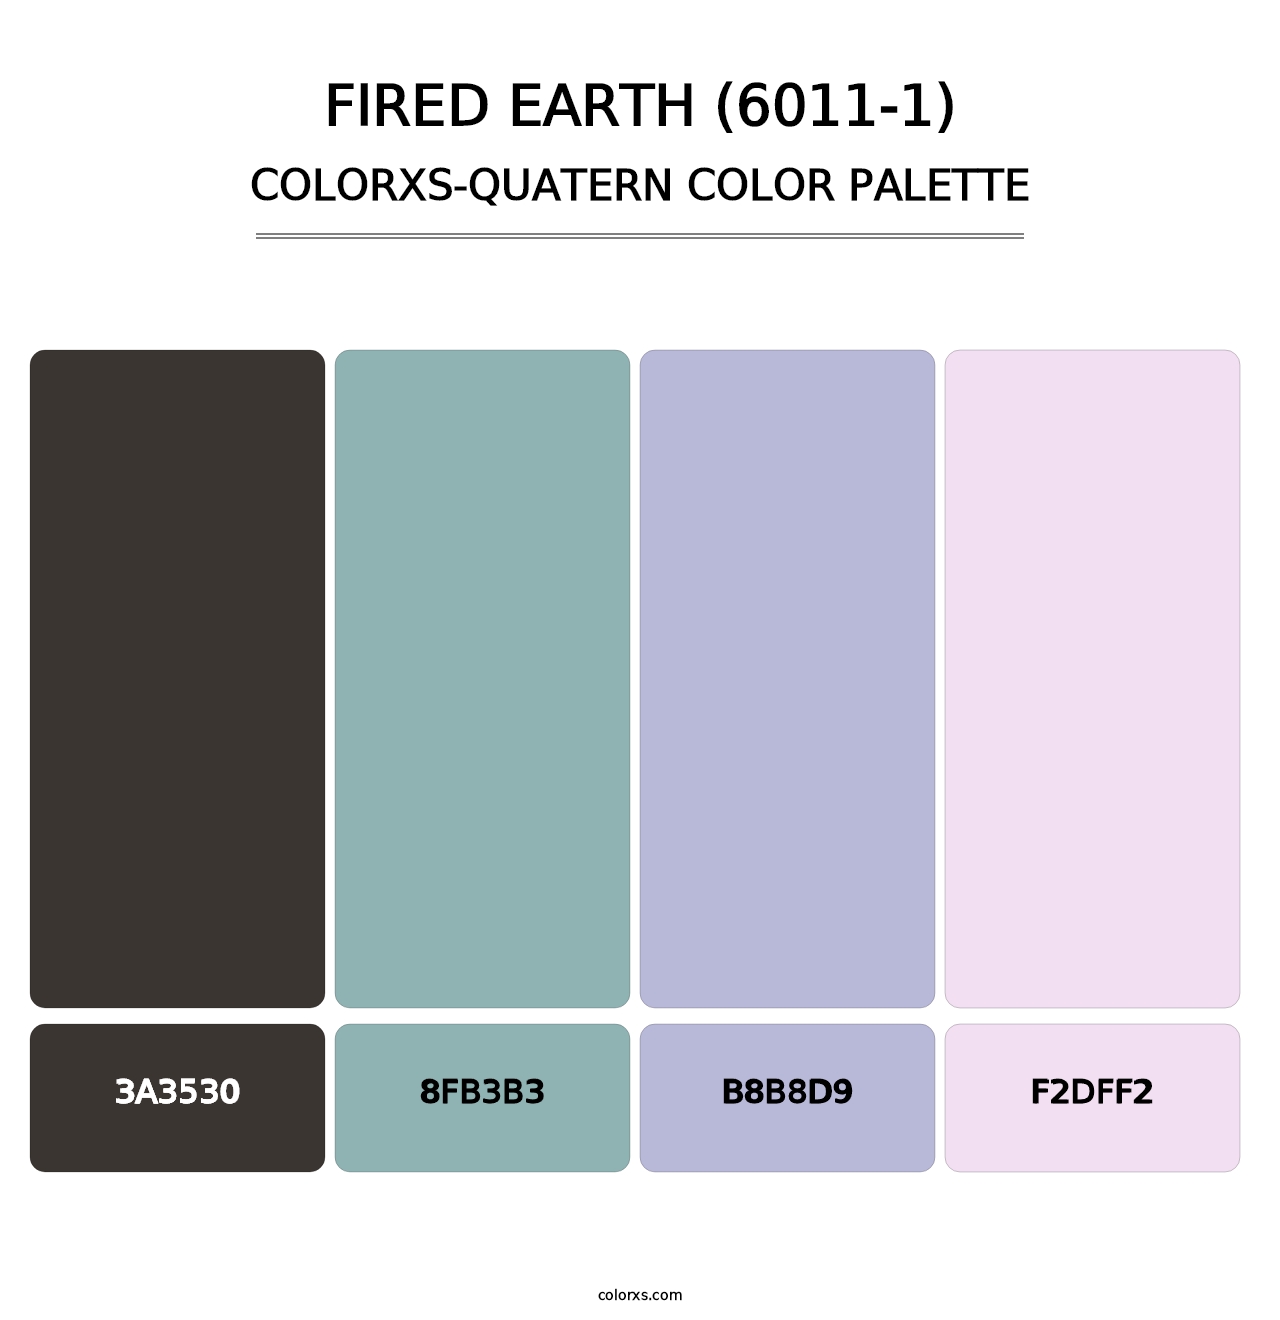 Fired Earth (6011-1) - Colorxs Quatern Palette